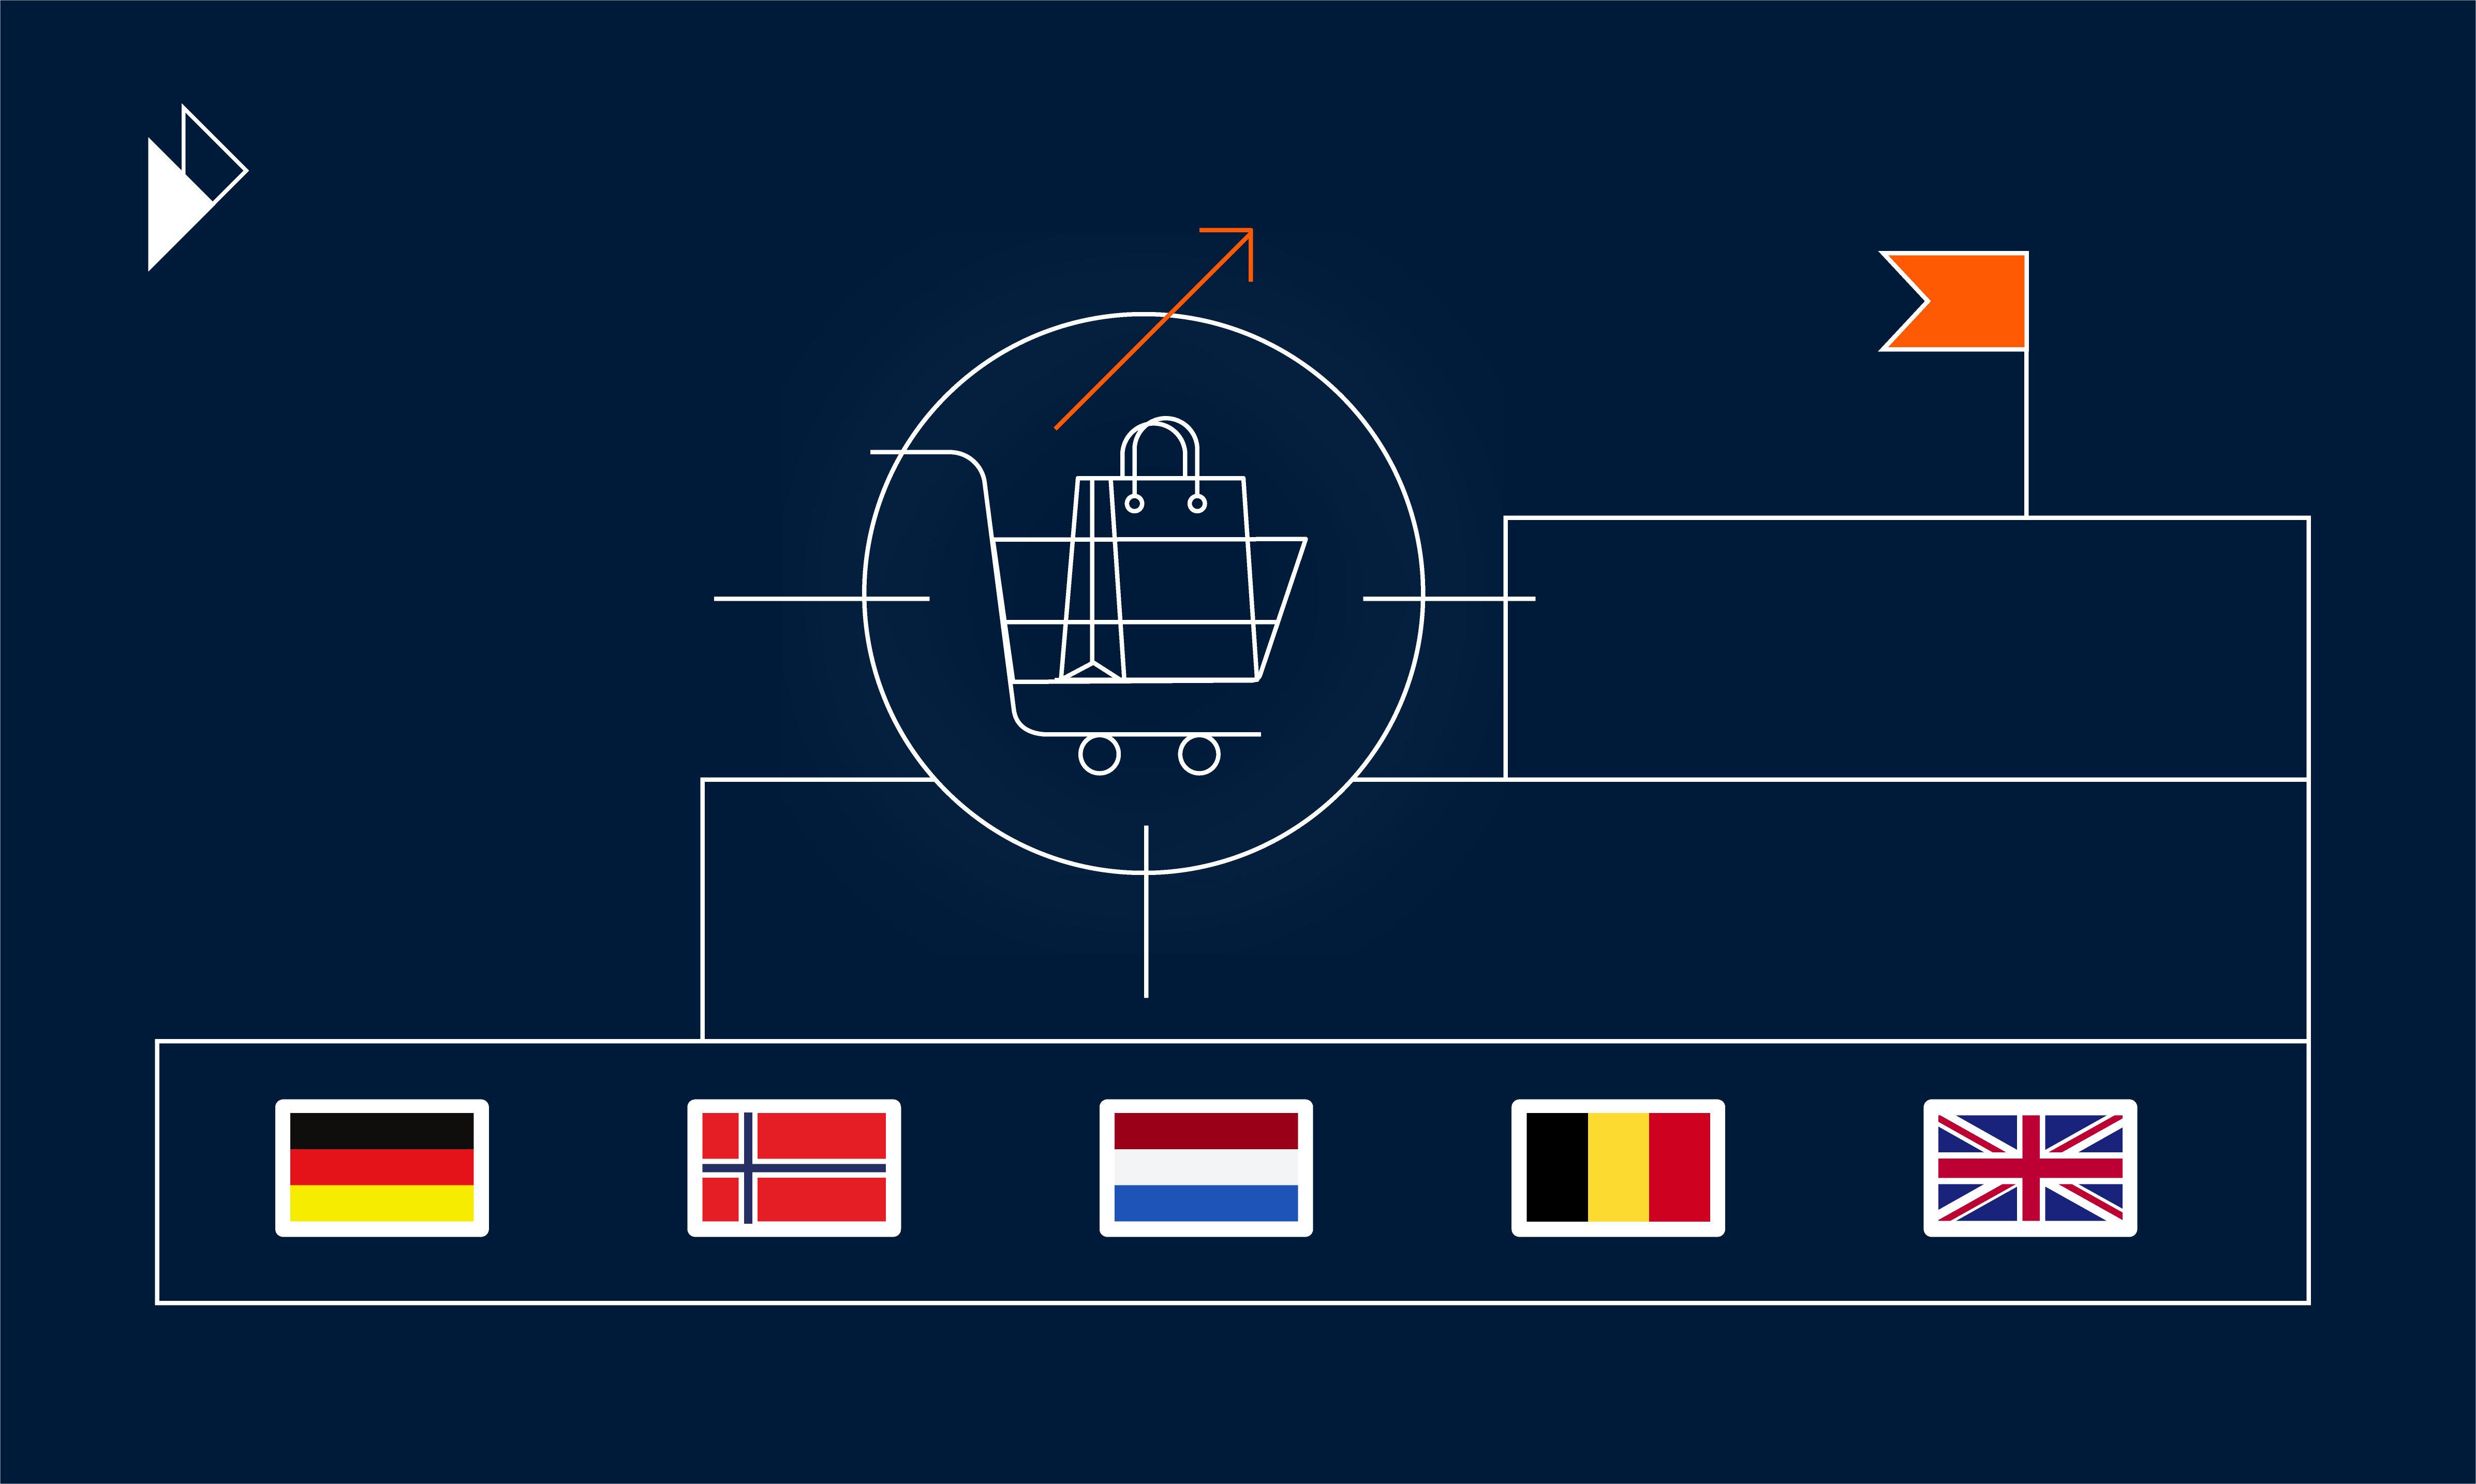 This is the header image for a blog post. Topic is EU, European e-commerce logistics. Post provides insights and data into the EU or European e-commerce logistics market. It also provides advice on how to leverage data to prepare an e-commerce business for future challenges and opportunities. Image is an abstract design that includes a shopping cart, charts, and the national flags of Belgium, Norway, Netherlands, France, United Kingdom, and Germany.  